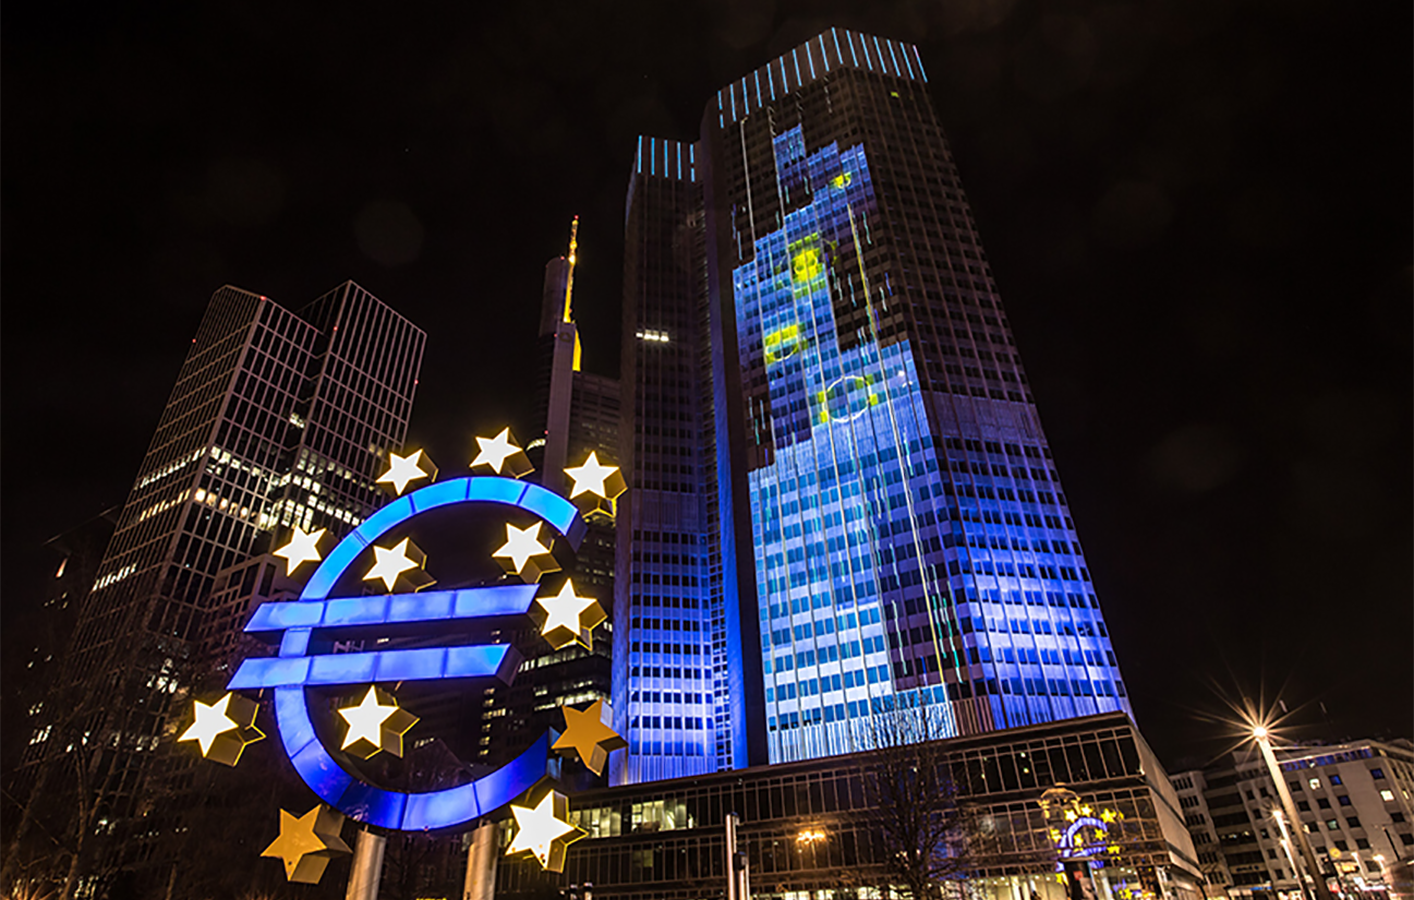 European Central Bank - United in Diversity